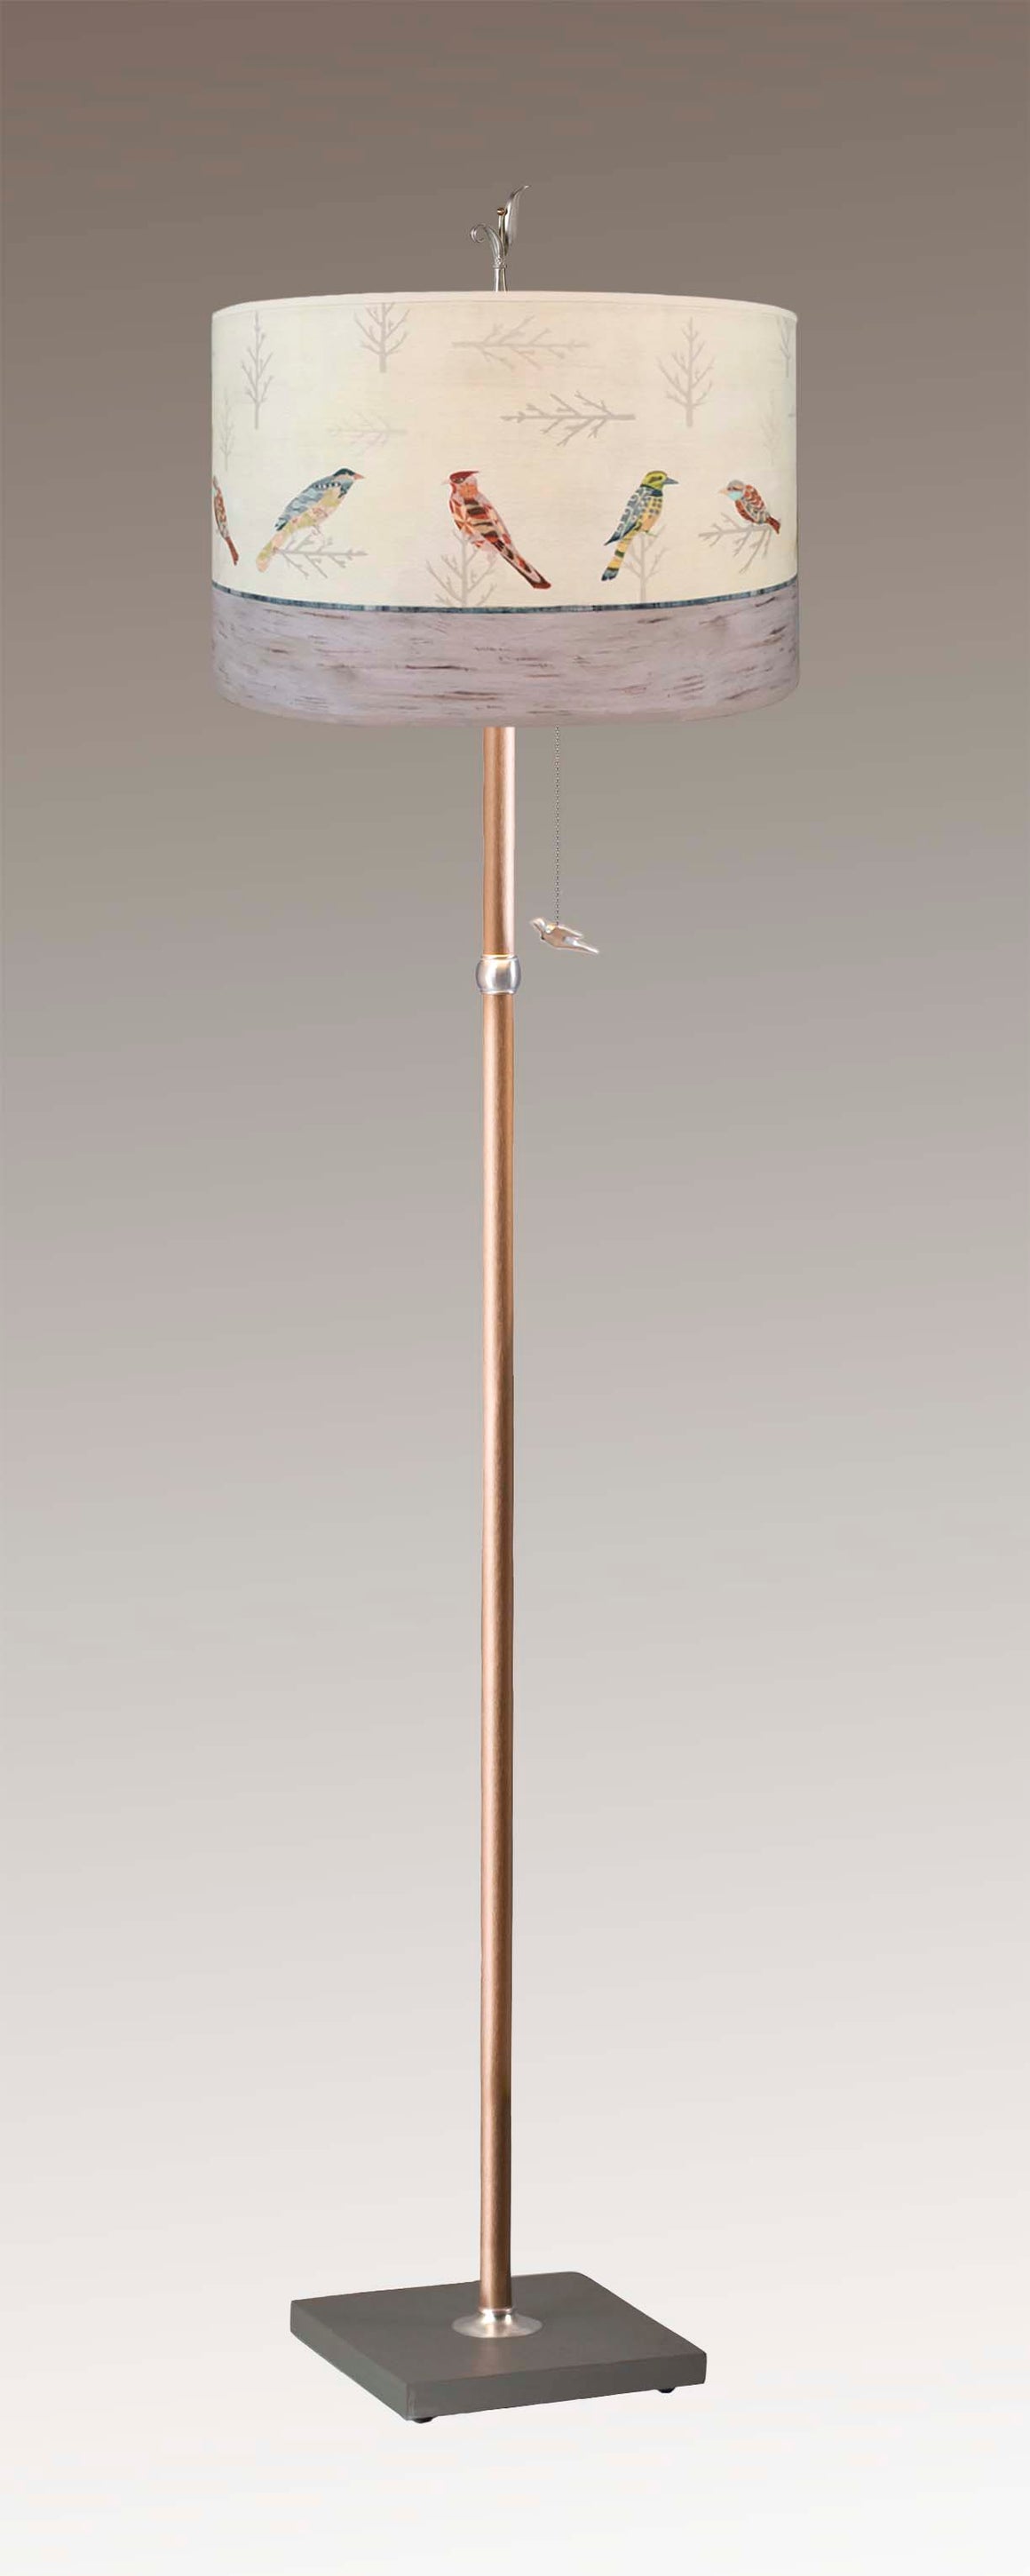 Copper Floor Lamp with Large Drum Lampshade in Bird Friends